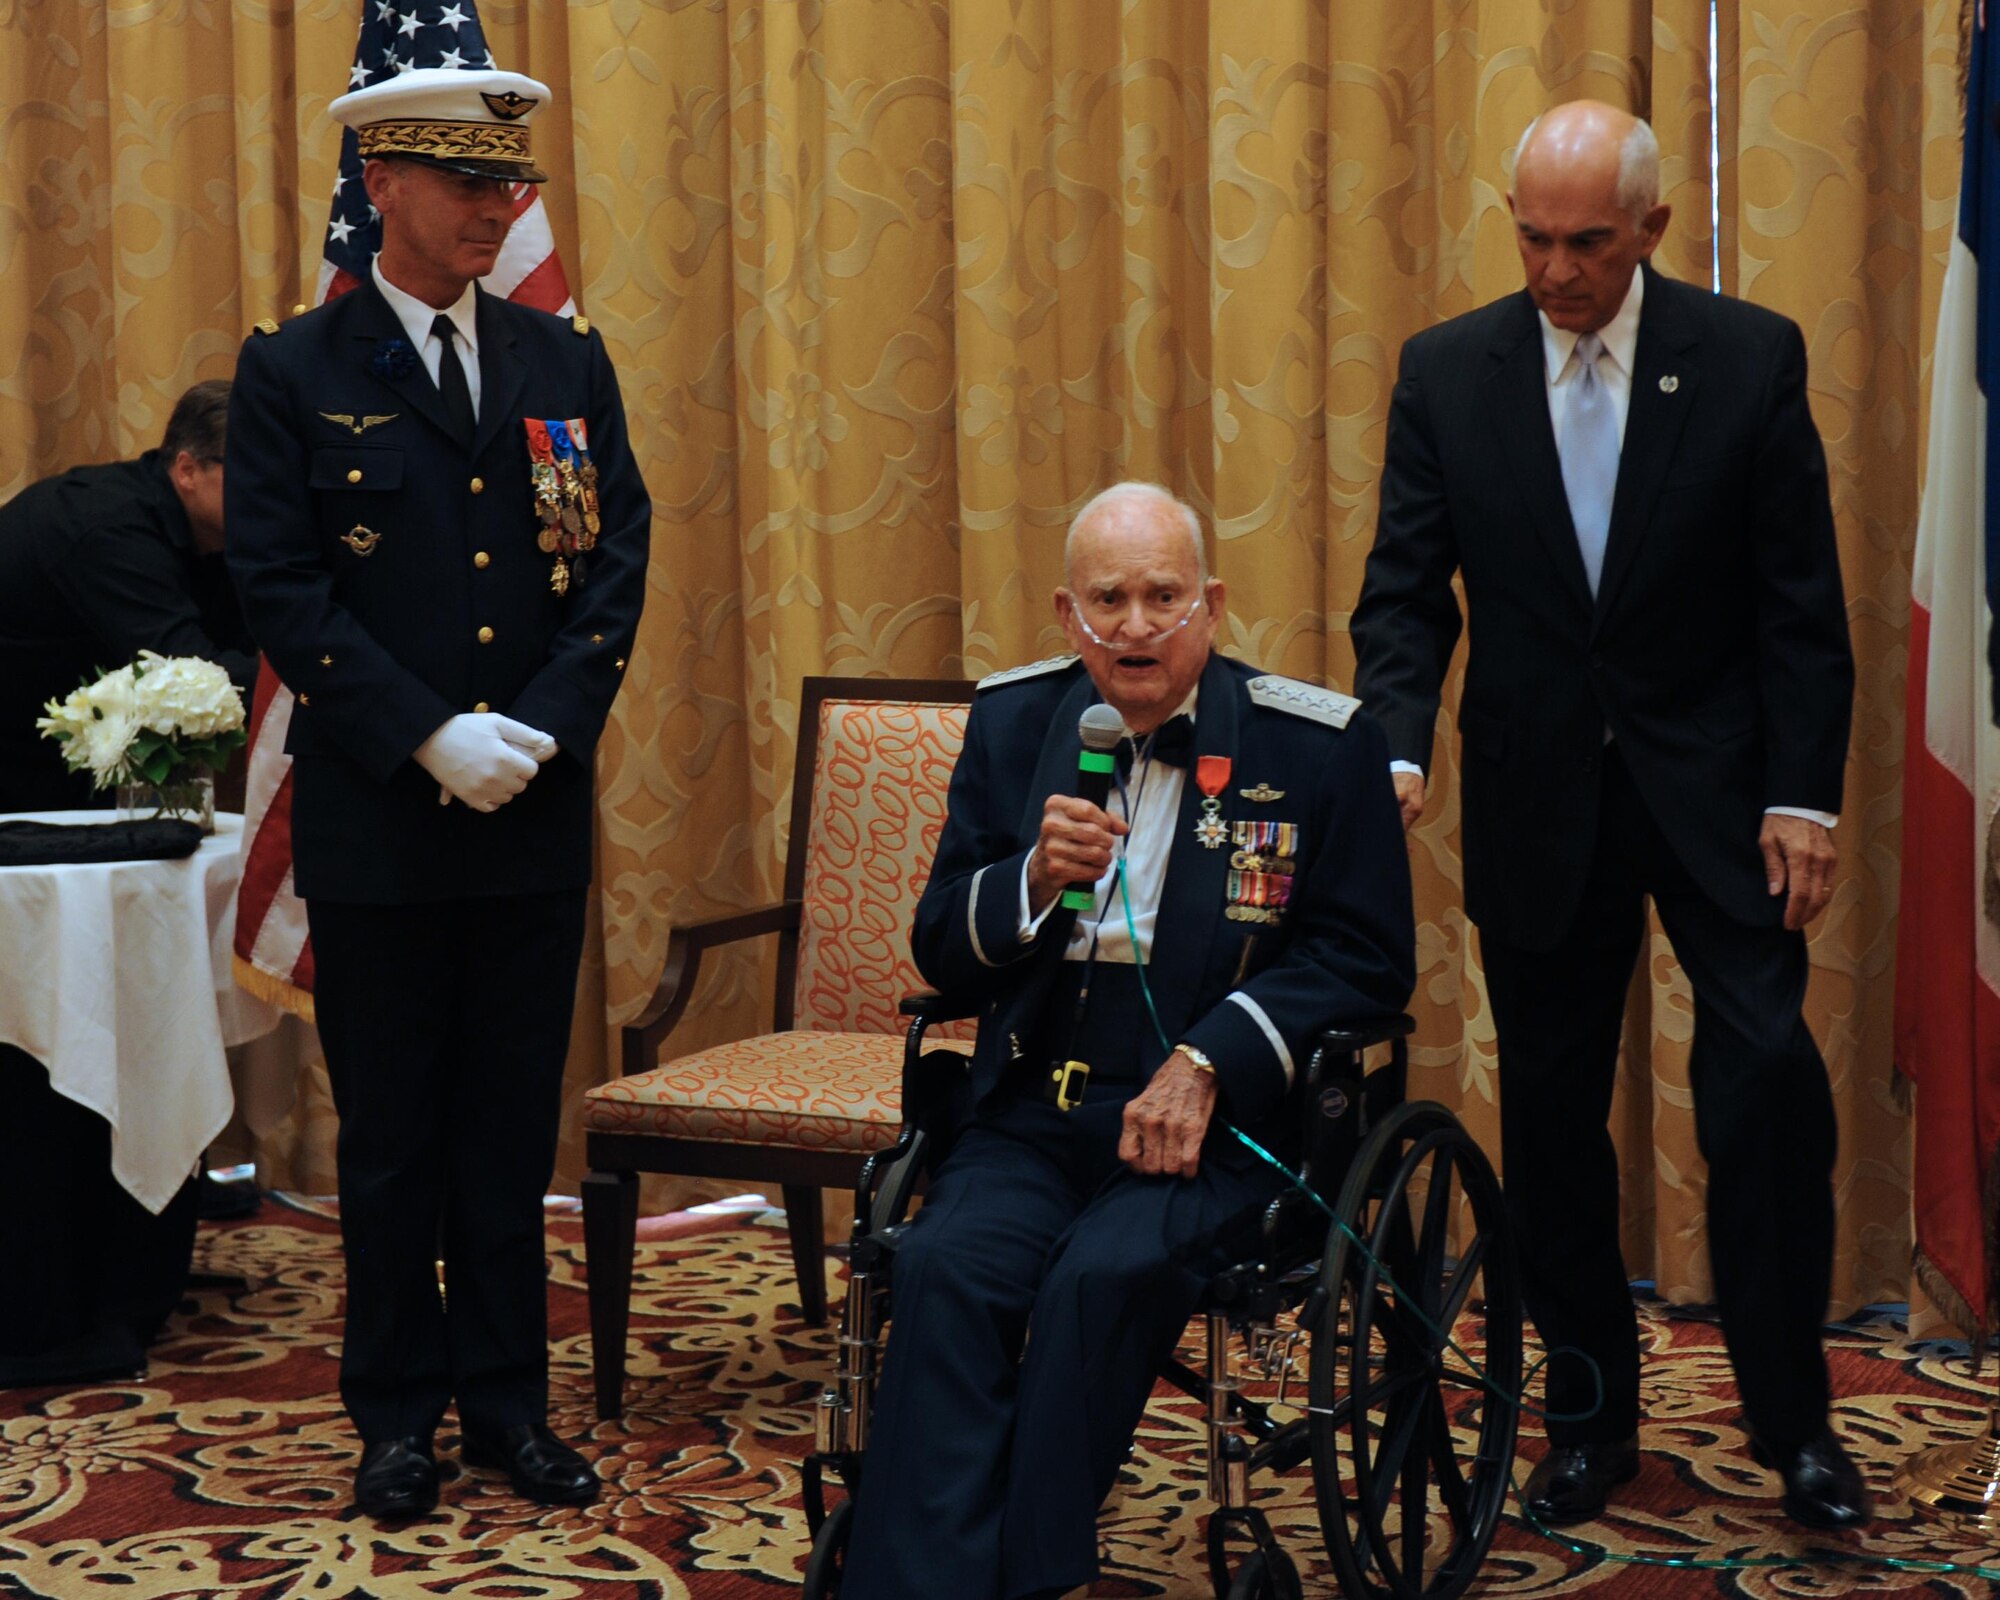 Retired Gen. Seth McKee, World War II veteran, speaks after receiving France’s highest honor Oct. 5, 2016 in Scottsdale, Ariz. McKee was also celebrating his 100th Birthday . (U.S. Air Force photo by Airman 1st Class Pedro Mota)